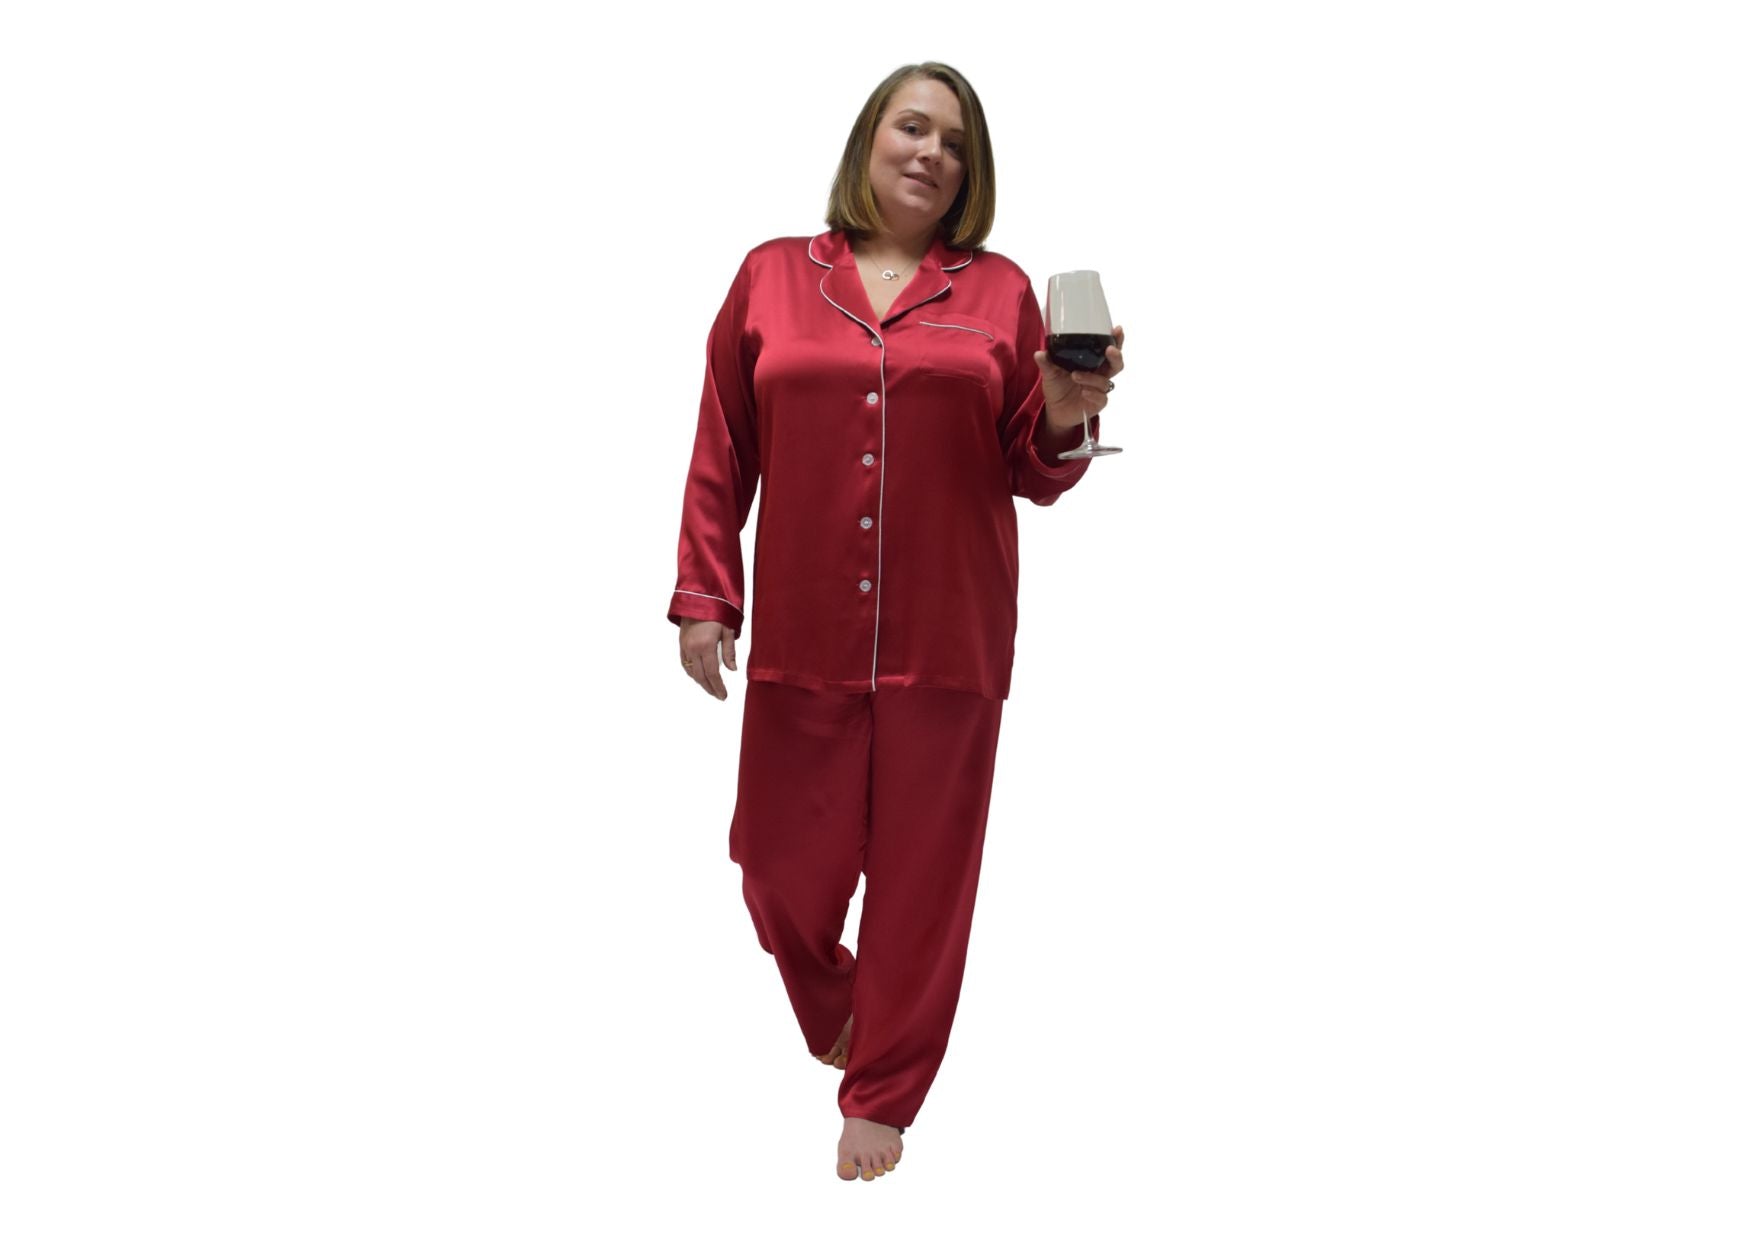  Women's Red Pajama Set - Women's Red Pajama Set -  -  - fine silk products by Forsters Finery